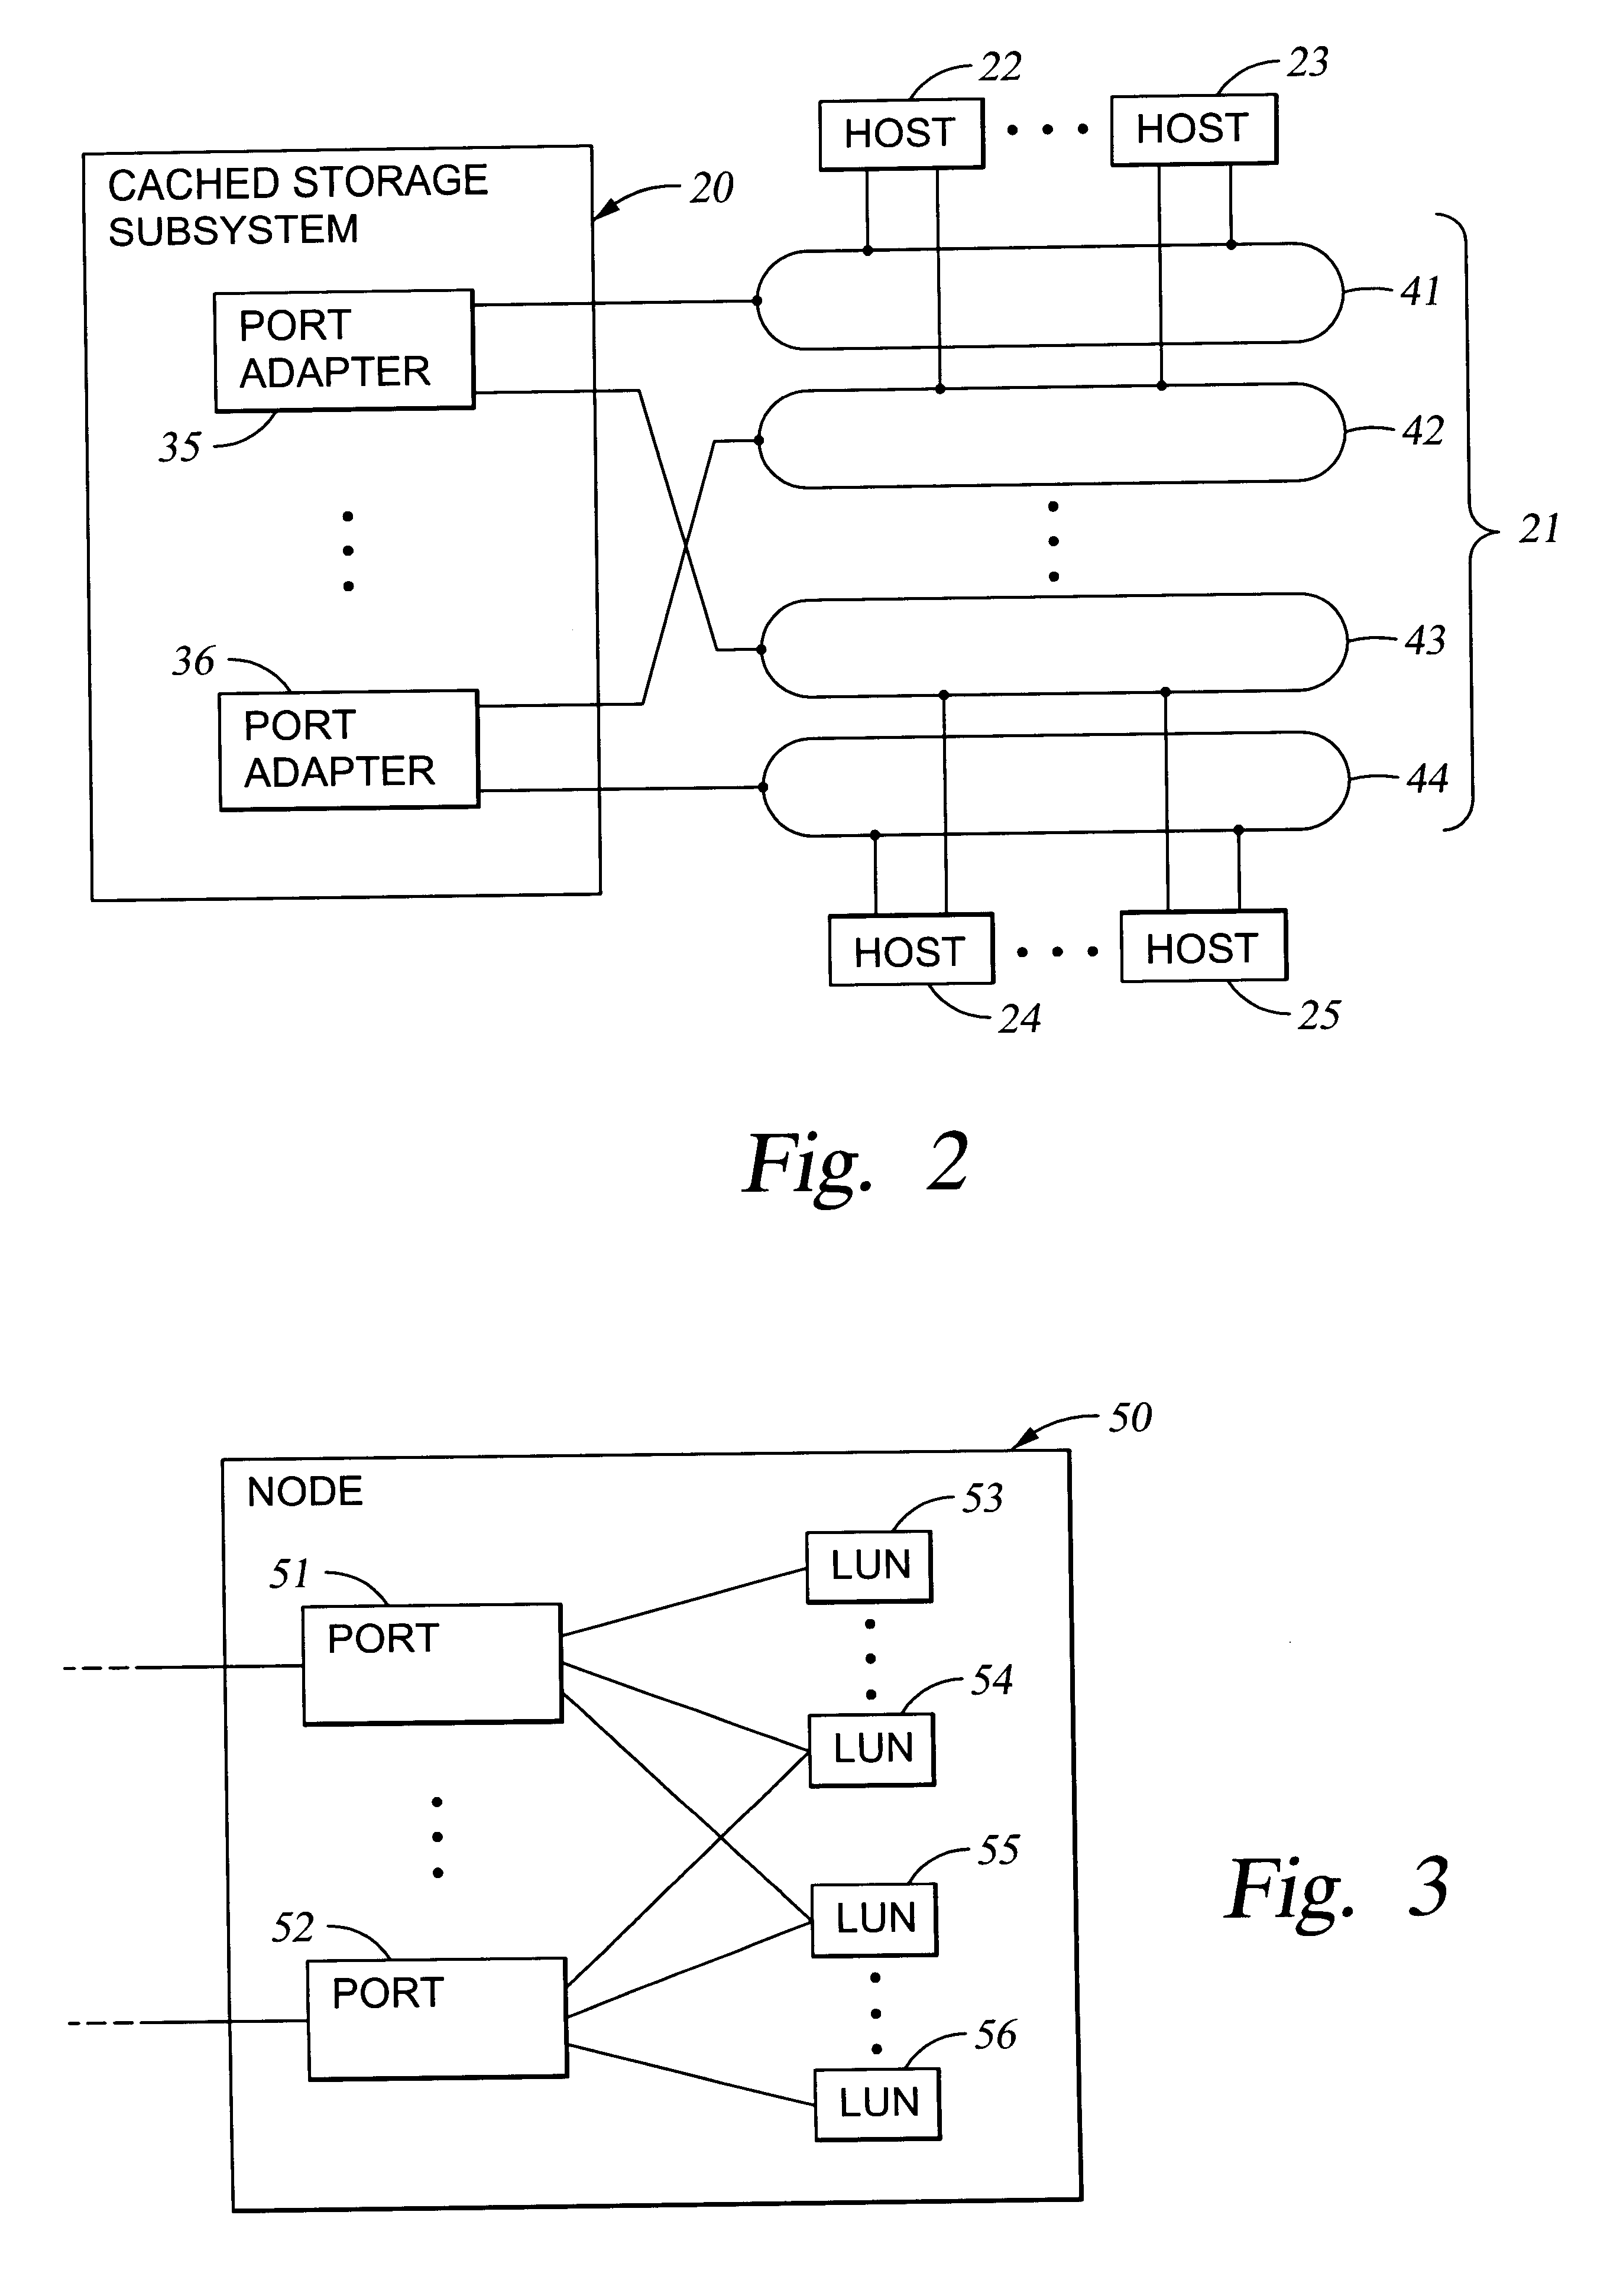 Virtual ports for data transferring of a data storage system